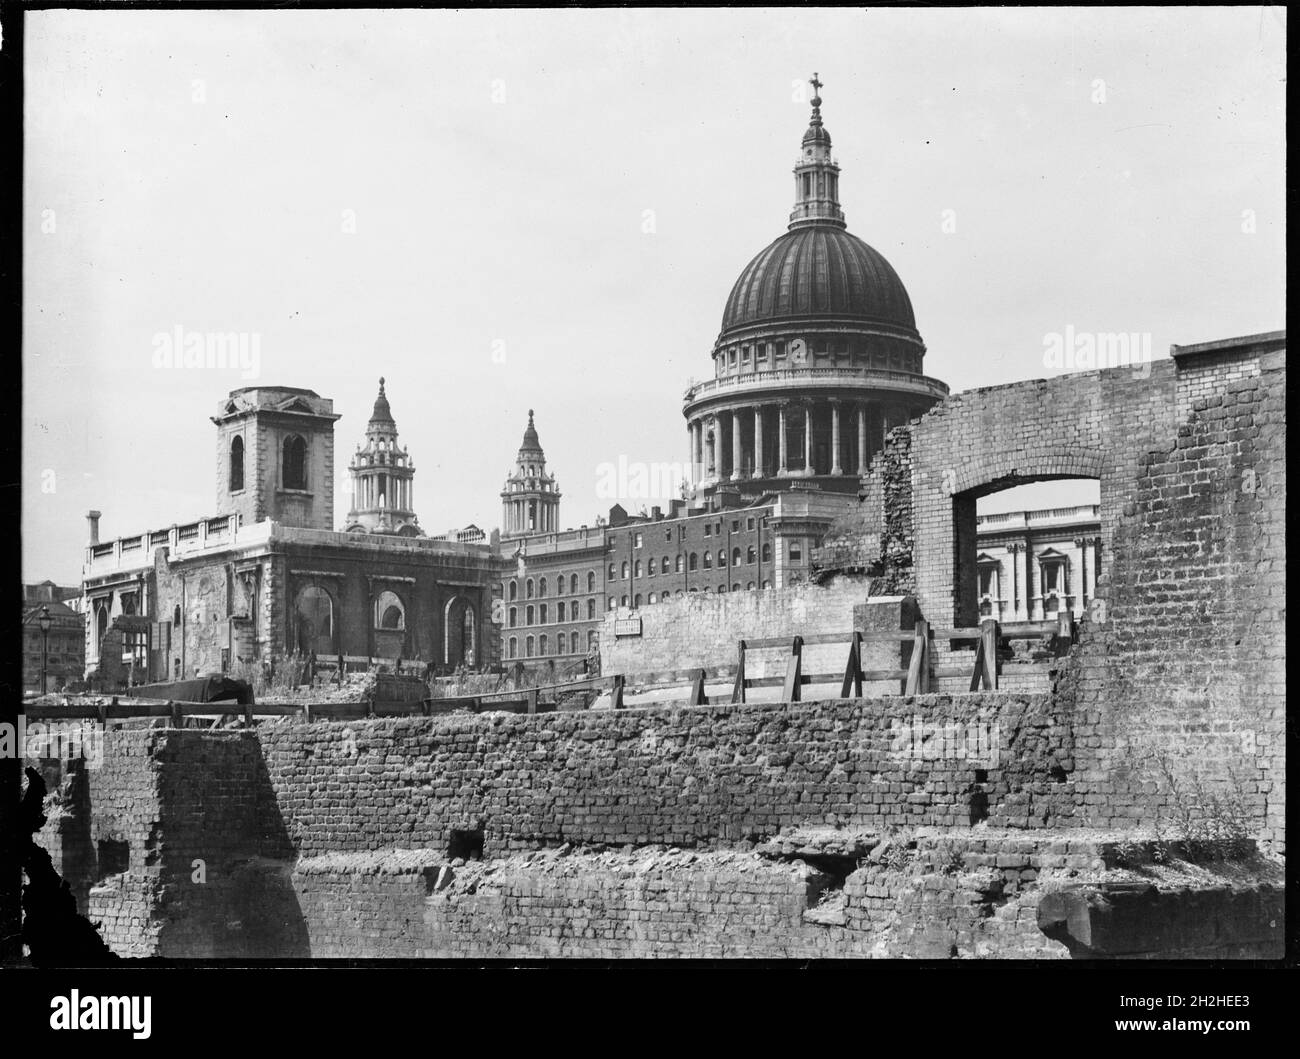 St Paul's Cathedral, St Paul's Churchyard, City of London, City and County of the City of London, Greater London Authority, 1941-1945. A view looking north-west across a bomb damaged landscape towards St Paul's Cathedral with St Nicholas Cole Abbey on the left of the foreground. St Nicholas Cole Abbey was rebuilt by Christopher Wren after the Great Fire of London in 1666. During the Second World War it was again badly damaged by bombing and lay in ruins until it was restored in 1962. Stock Photo